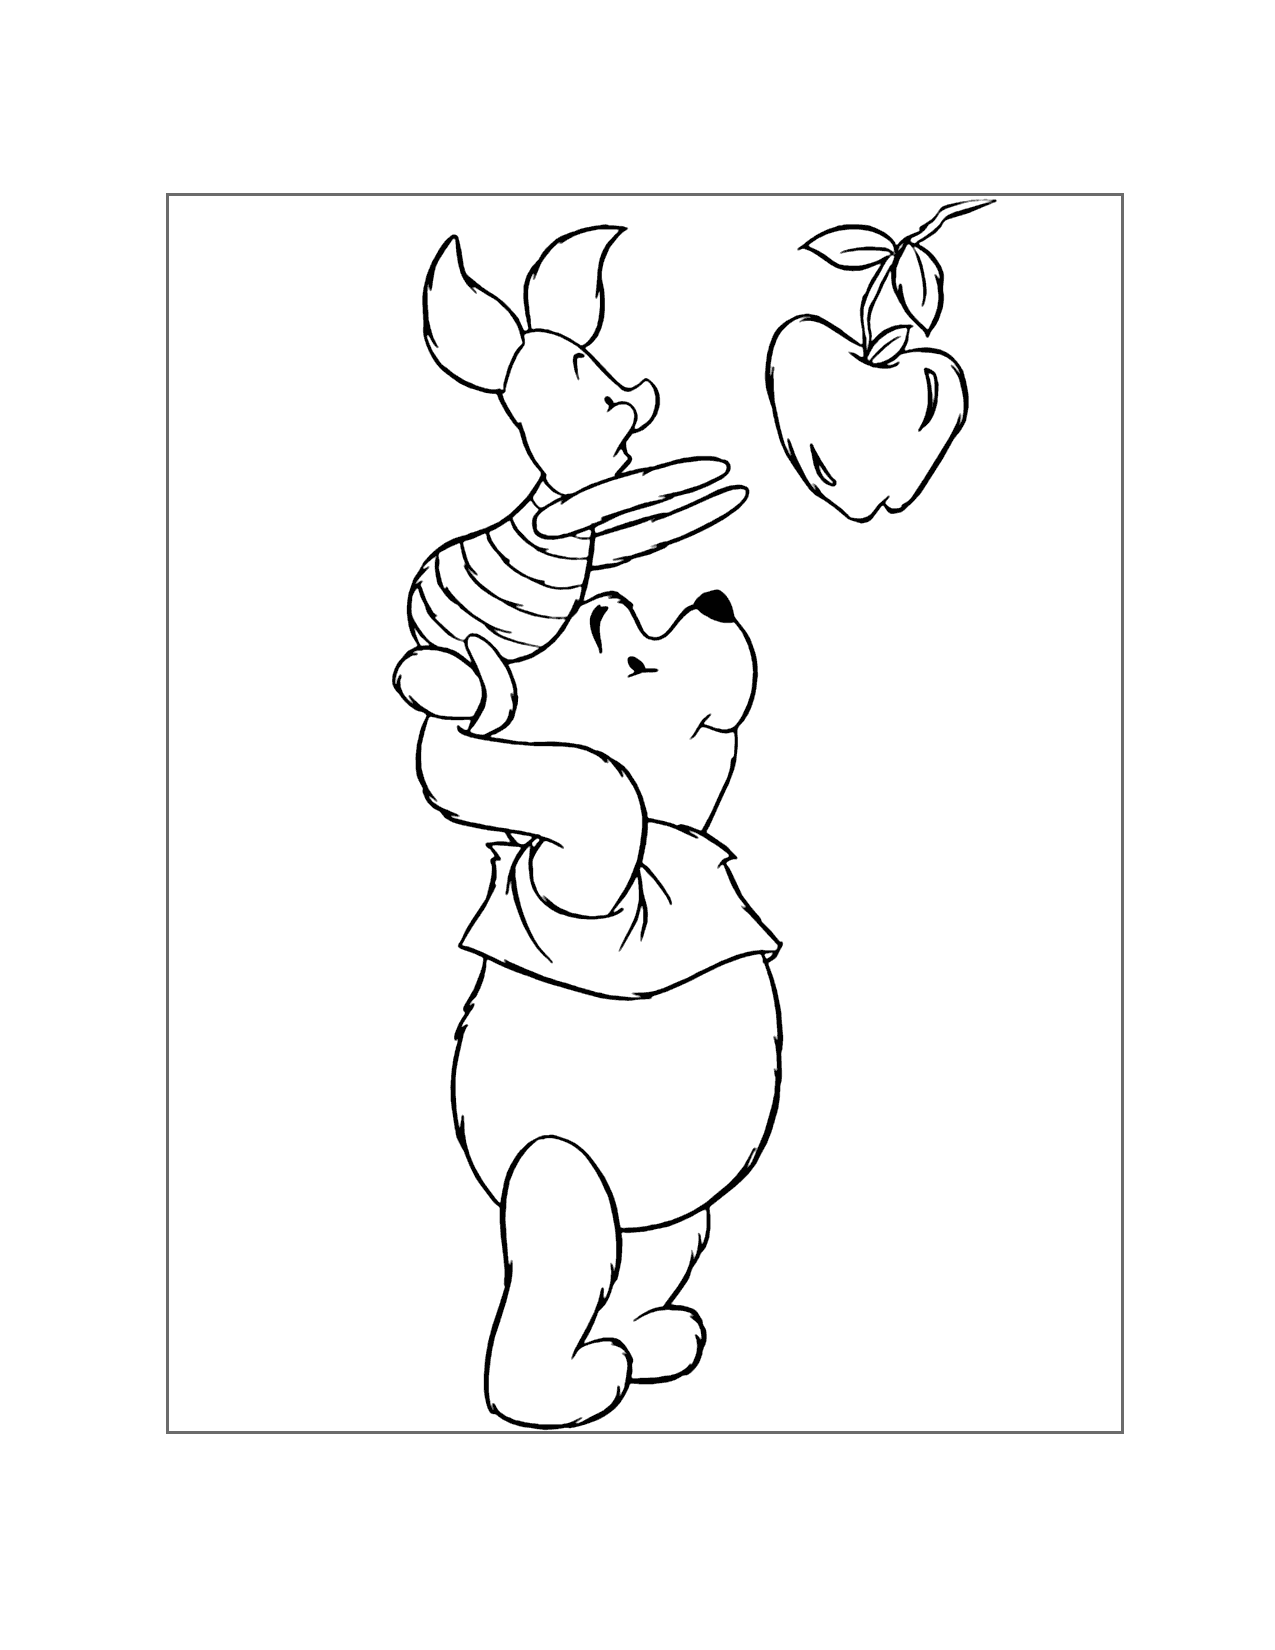 Pooh And Piglet Pick Apples Coloring Page